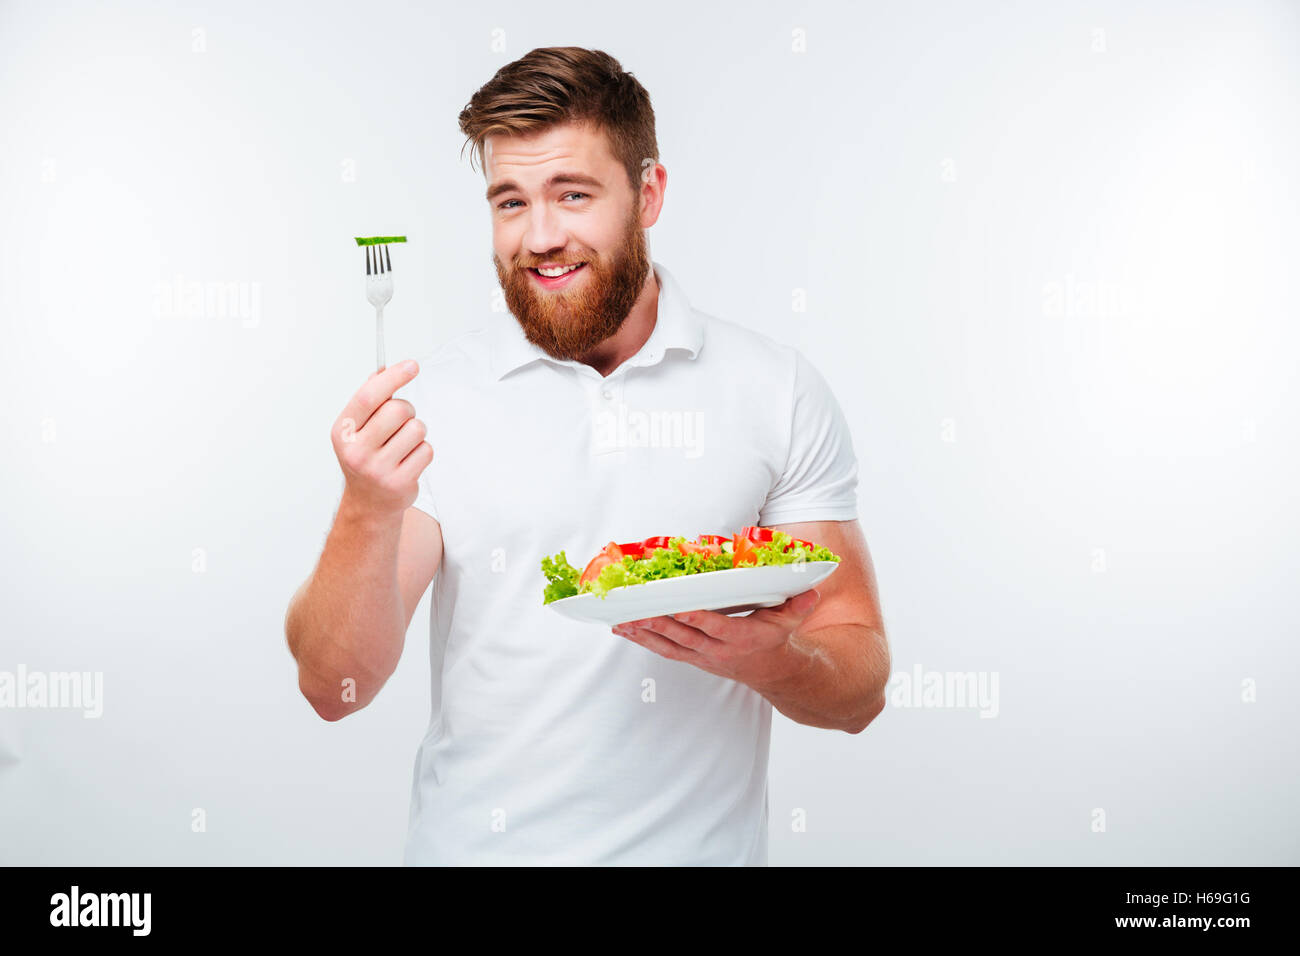 Young man is a happy salad tosser Stock Photo by ©lofilolo 30031259